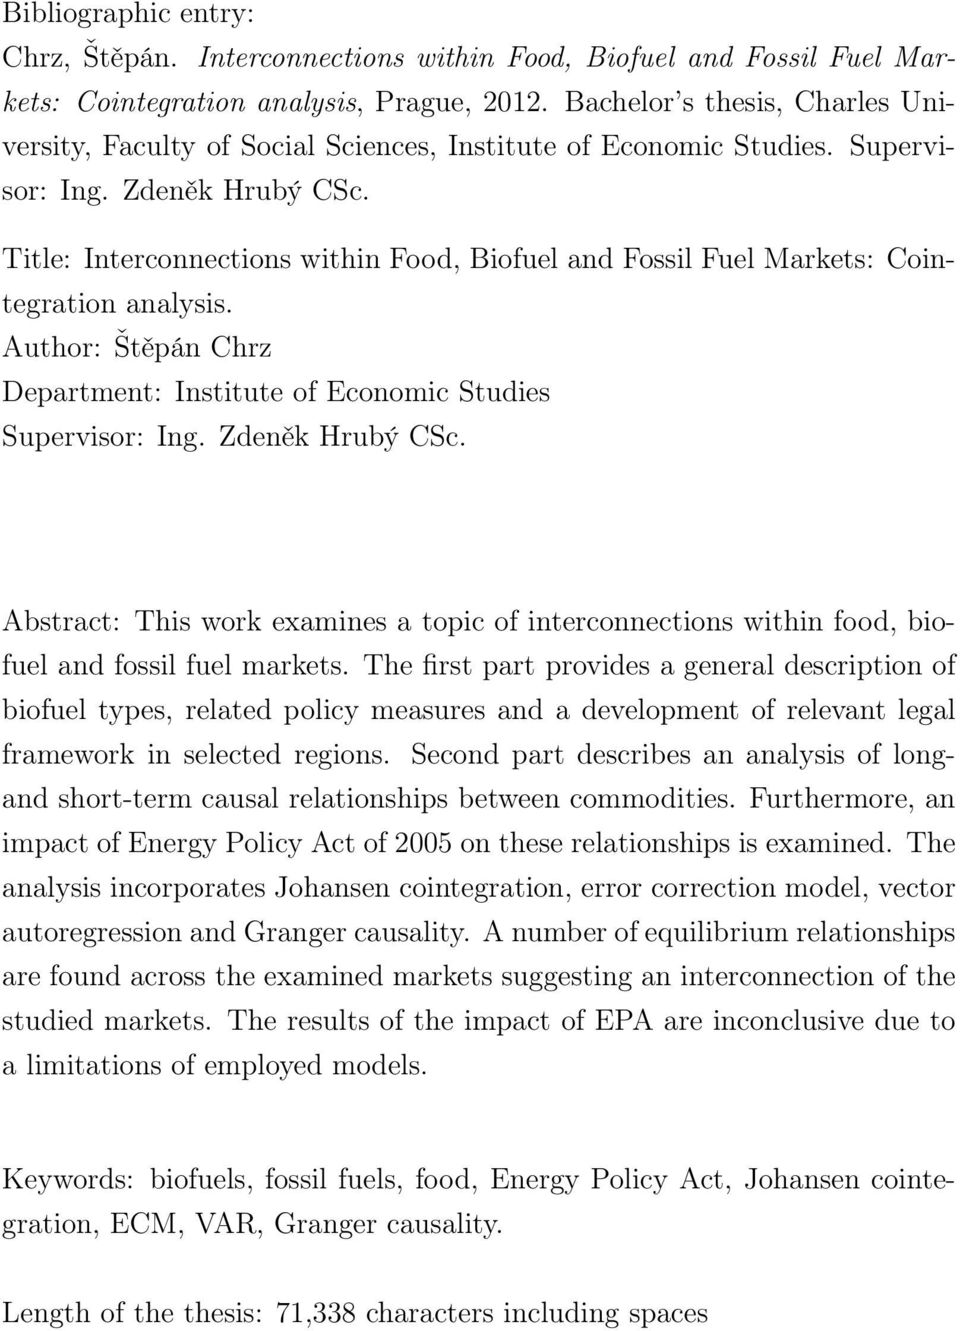 Title: Interconnections within Food, Biofuel and Fossil Fuel Markets: Cointegration analysis. Author: Štěpán Chrz Department: Institute of Economic Studies Supervisor: Ing. Zdeněk Hrubý CSc.